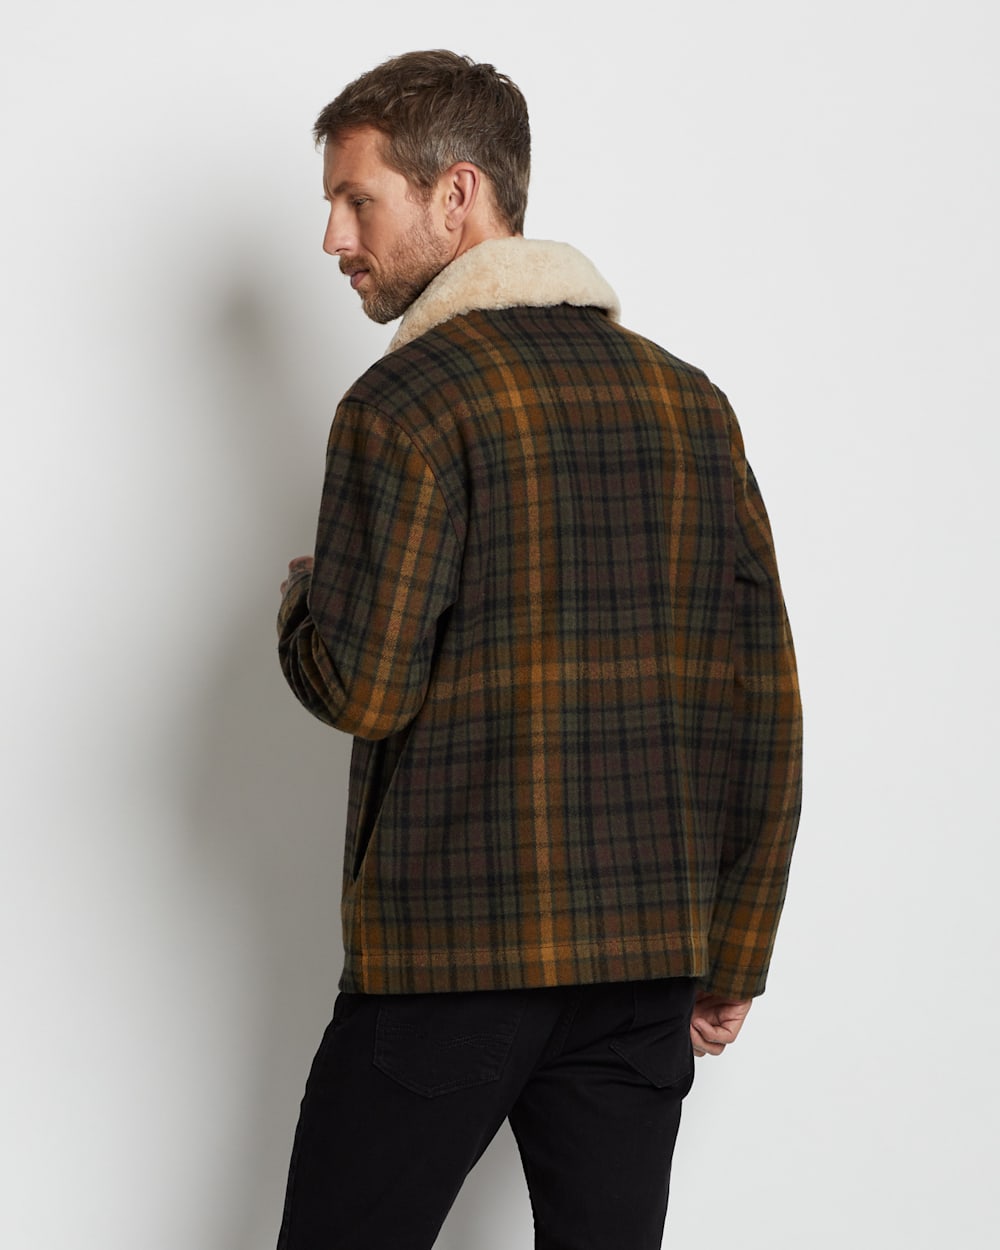 ALTERNATE VIEW OF MEN'S PLAID SILVERTON COAT IN OLIVE/GREEN image number 4